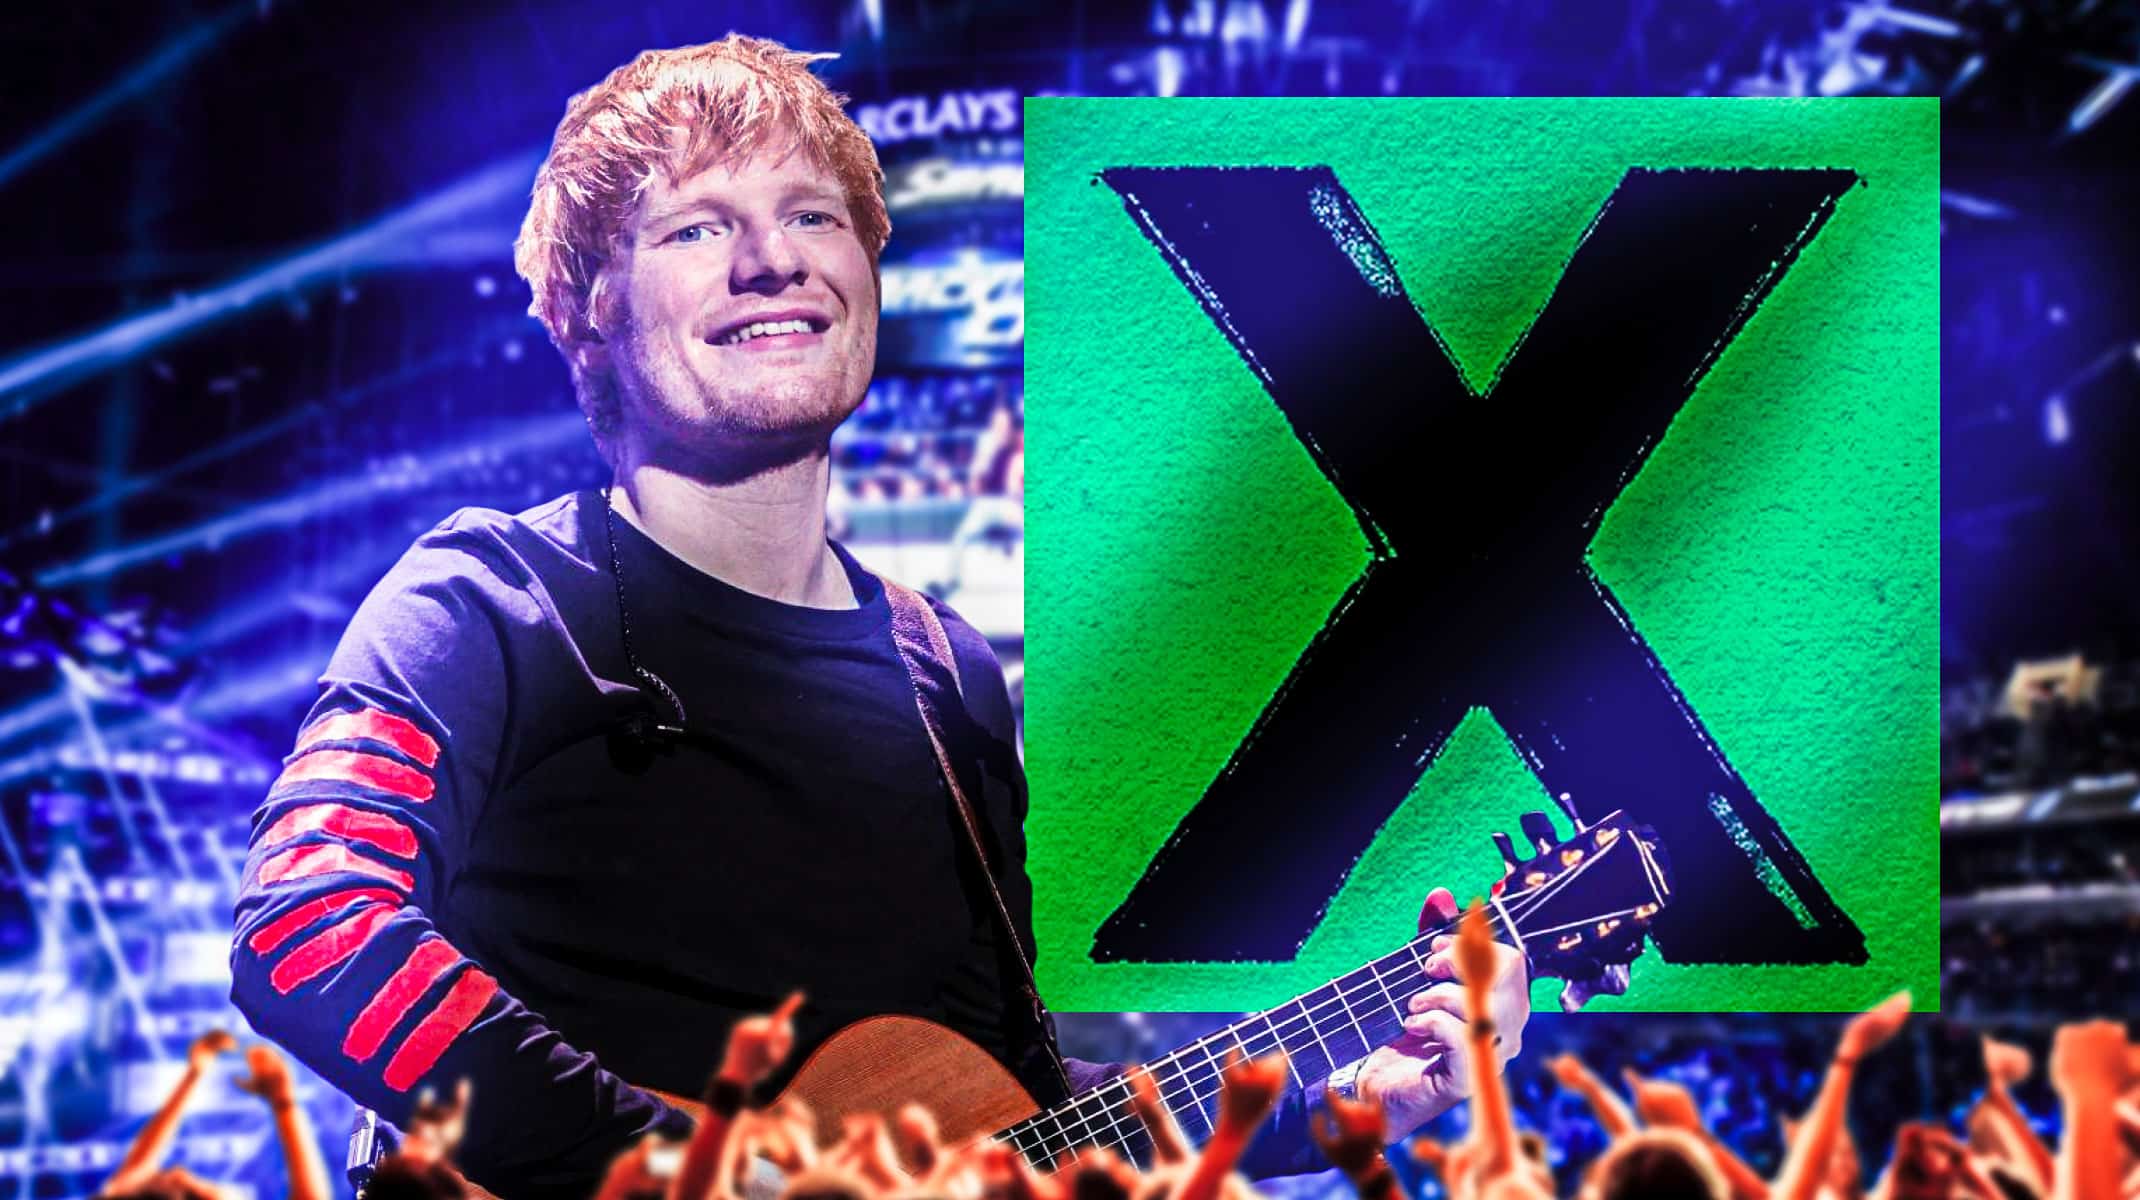 Ed Sheeran's Multiply anniversary show setlist: What did he play?